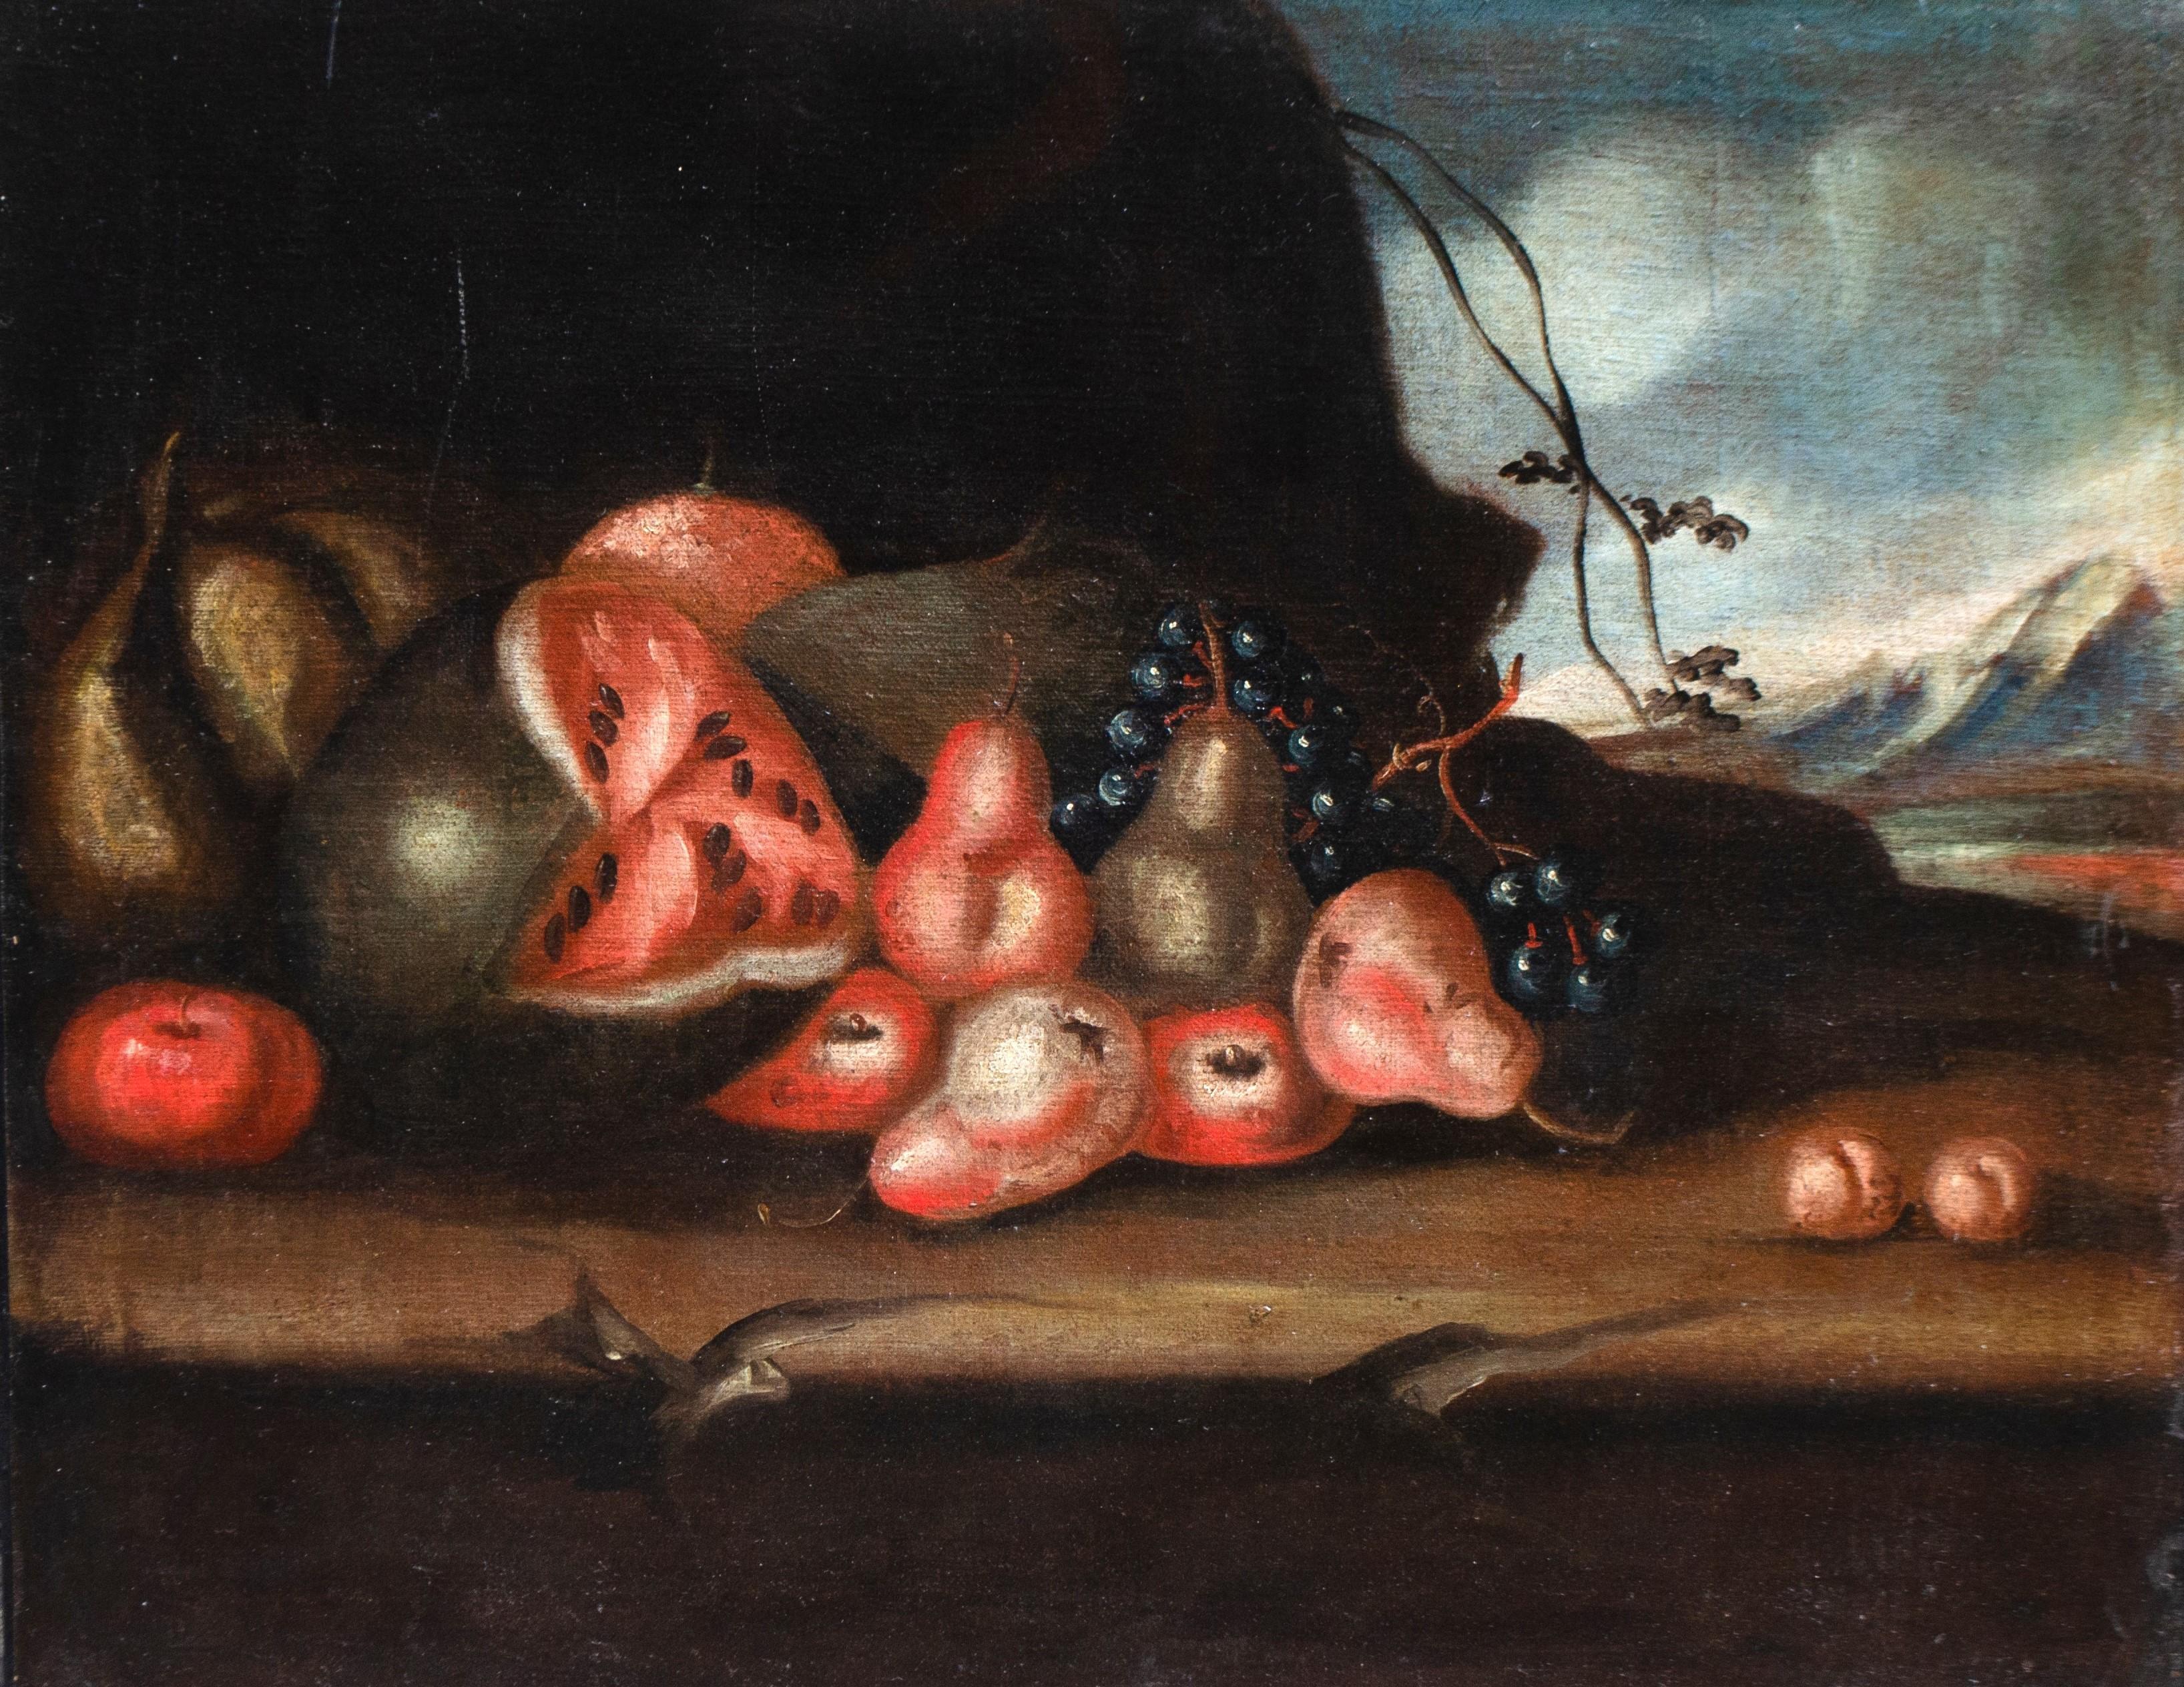 Unknown Figurative Painting - Still Life With Watermelon, Pears, And Grapes. Lombard School Of The 17th-18th C